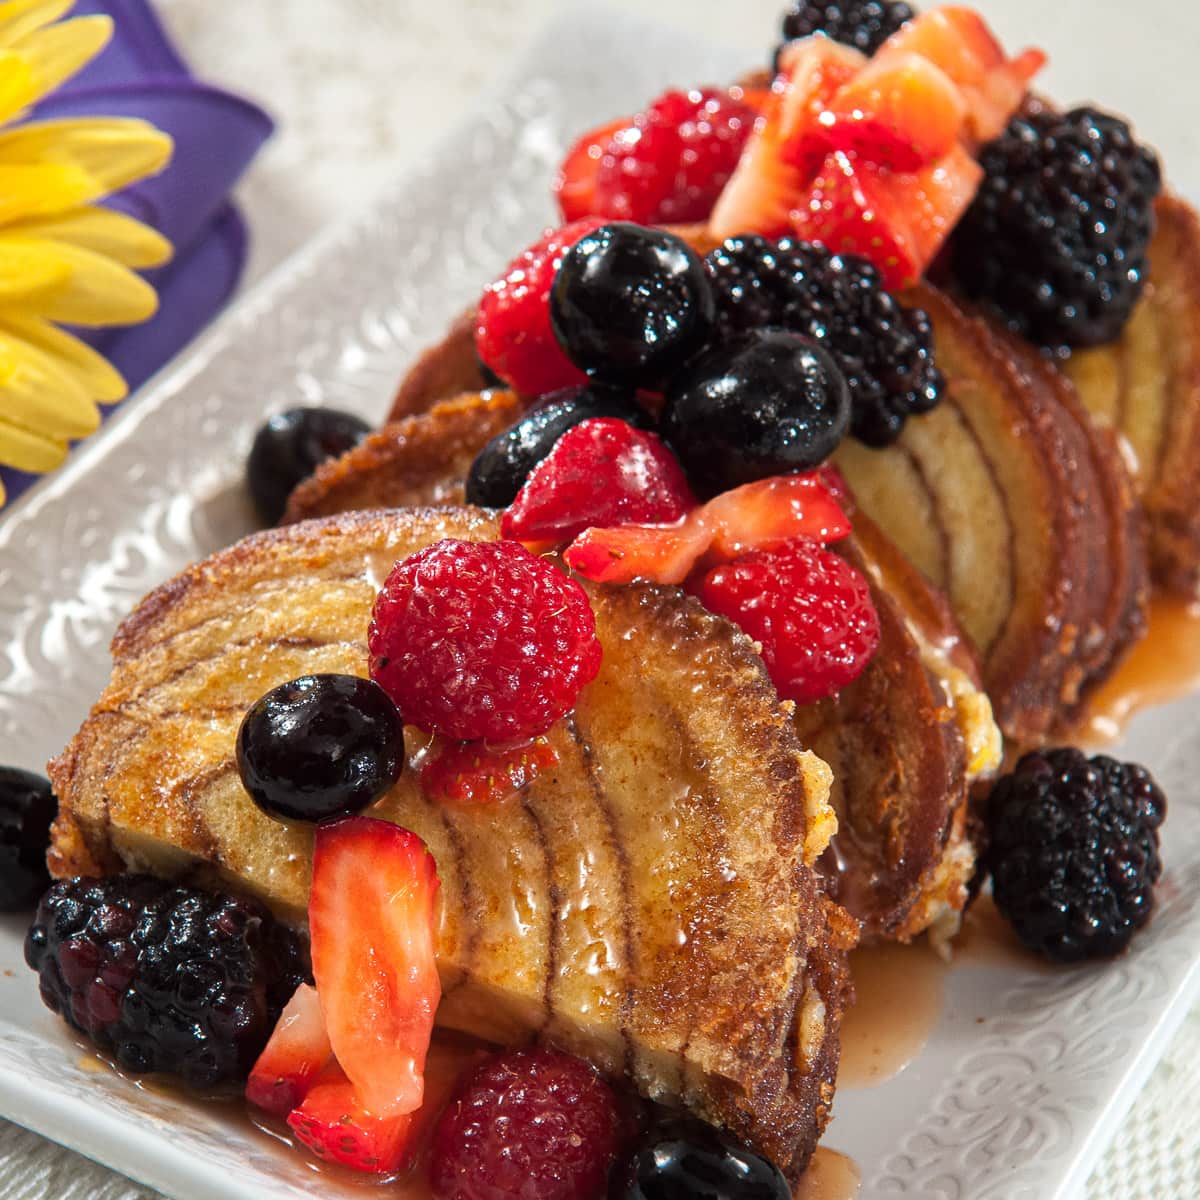 Slices of the French Toast with the Orange Cream Sauce fruit on a white plate with a bit of a yellow daisy and purple napkin.